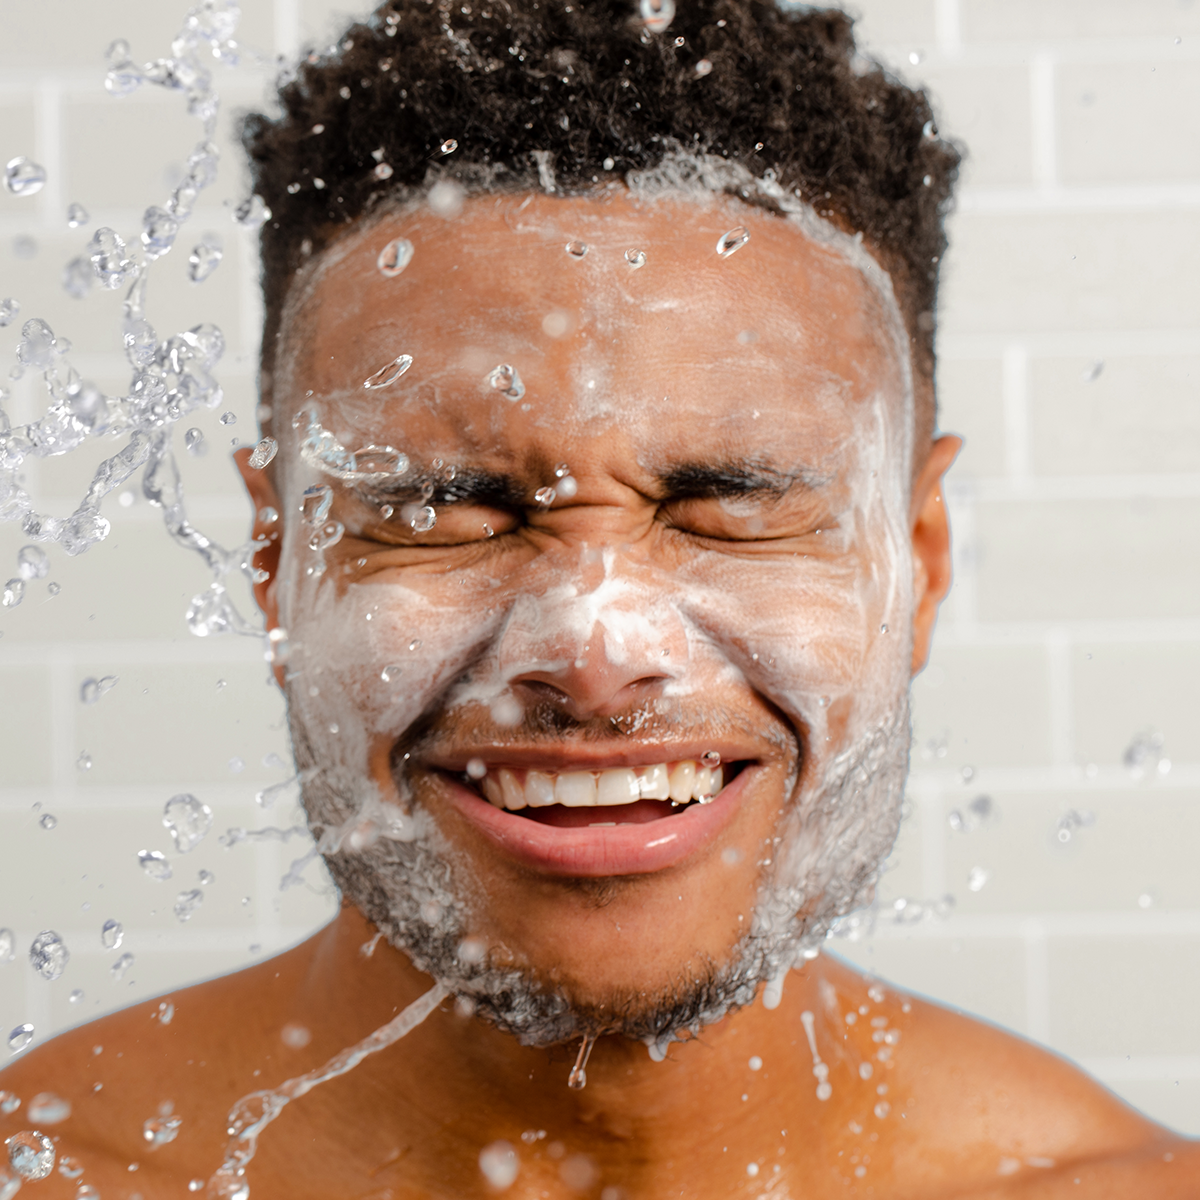 Mens Oily Skin Guide The Essential Products and Tips photo